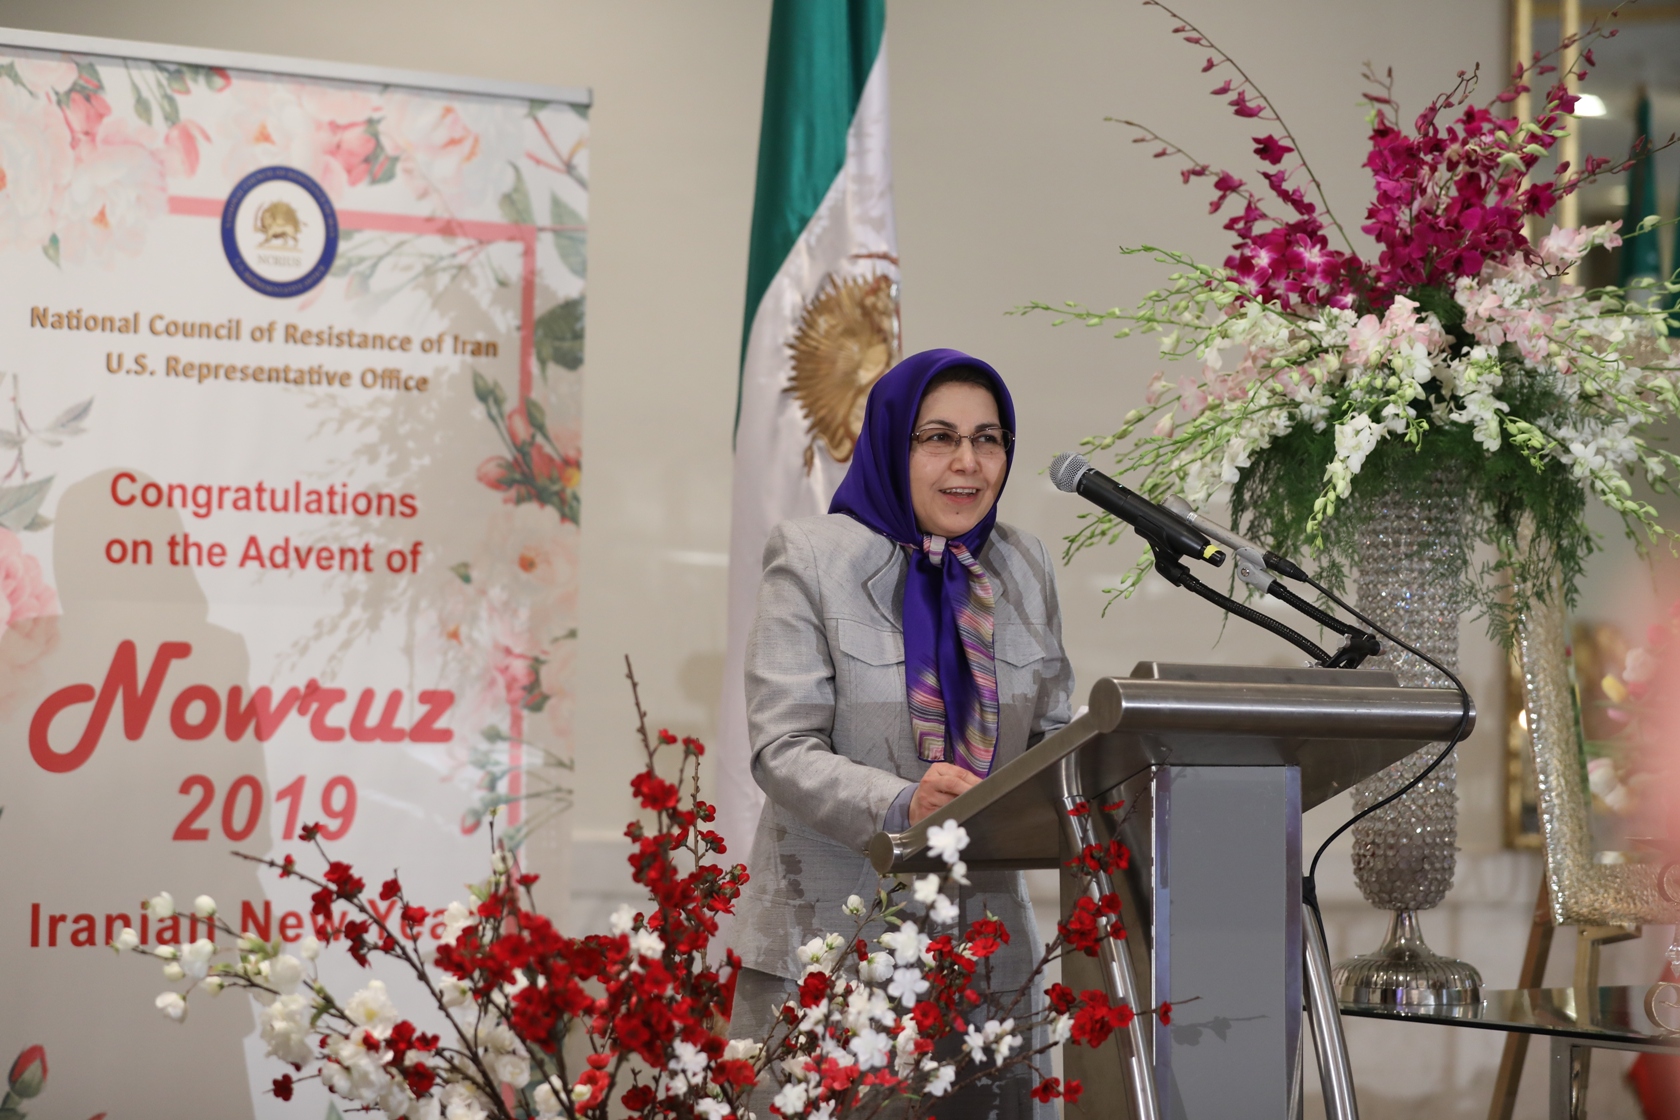 National Council of Resistance of Iran, Monday, March 25, 2019, Press release picture